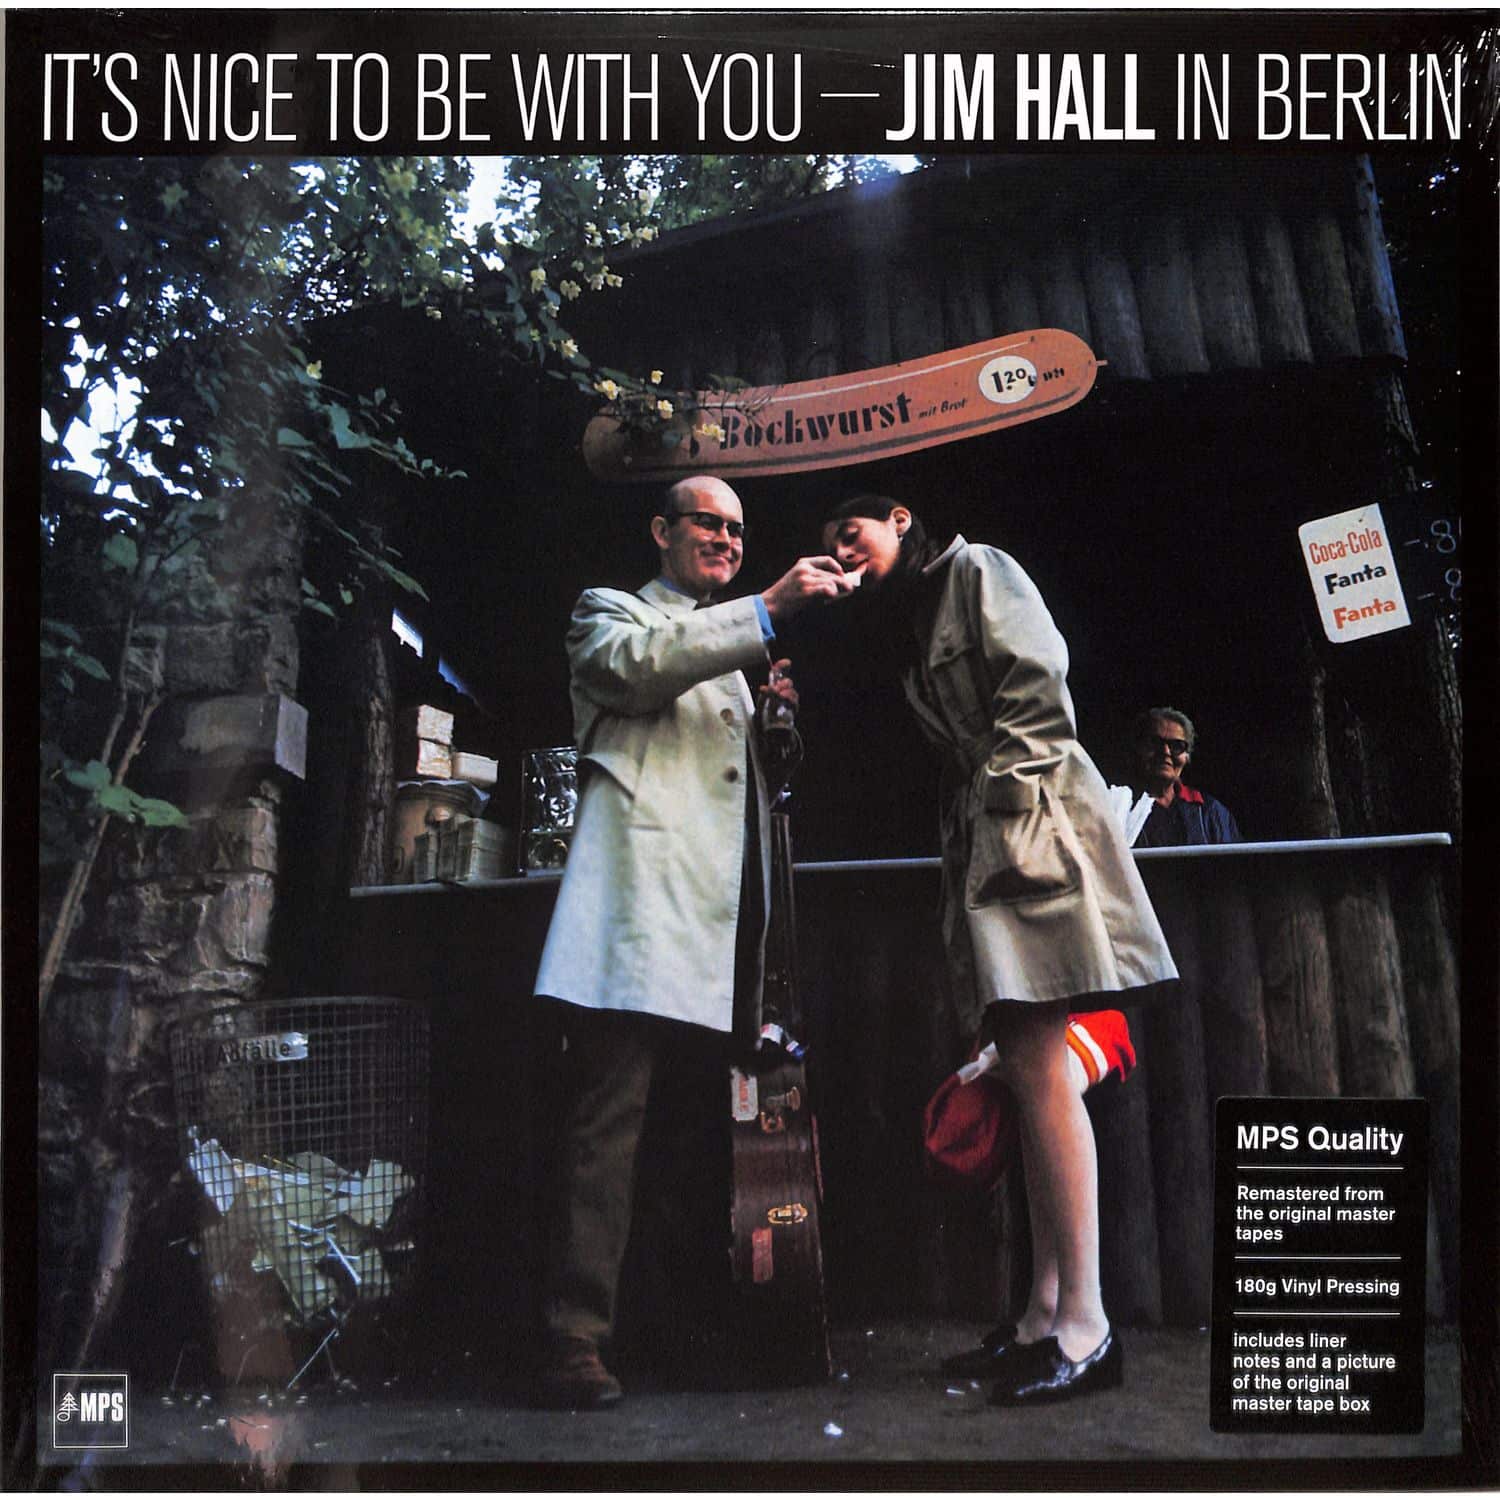 Jim Hall - IT S NICE TO BE WITH YOU:JIM HALL IN BERLIN 